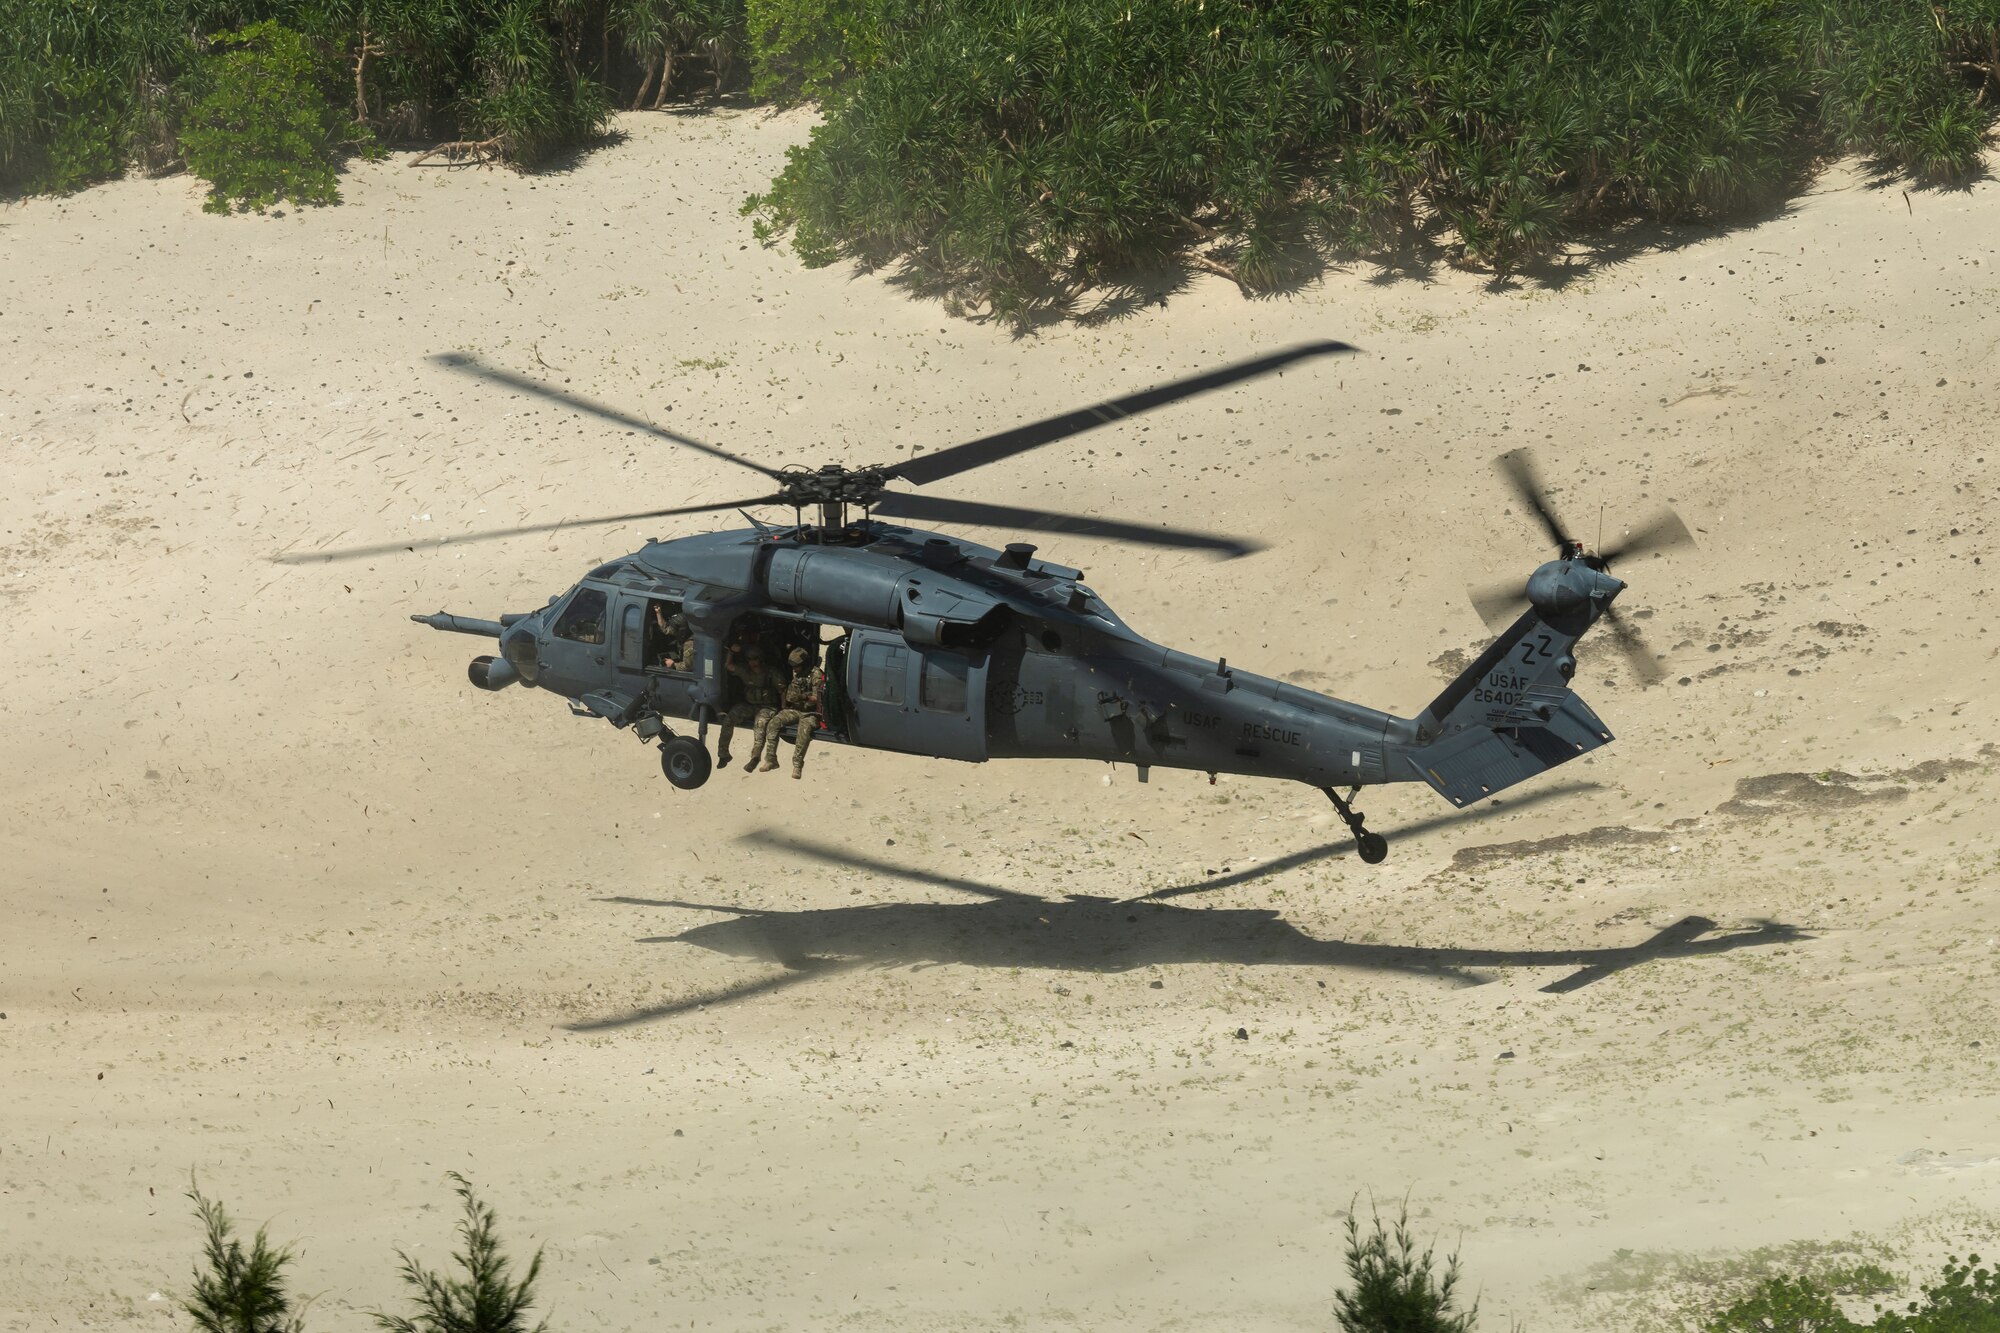 An HH-60G Pave Hawk from the 33rd Rescue Squadron prepares to land during a training exercise, July 25, 2019, out of Kadena Air Base, Japan. The HH-60G Pave Hawk’s core mission is recovery of personnel under hostile conditions, including combat search and rescue. (U.S. Air Force photo by Airman 1st Class Matthew Seefeldt)